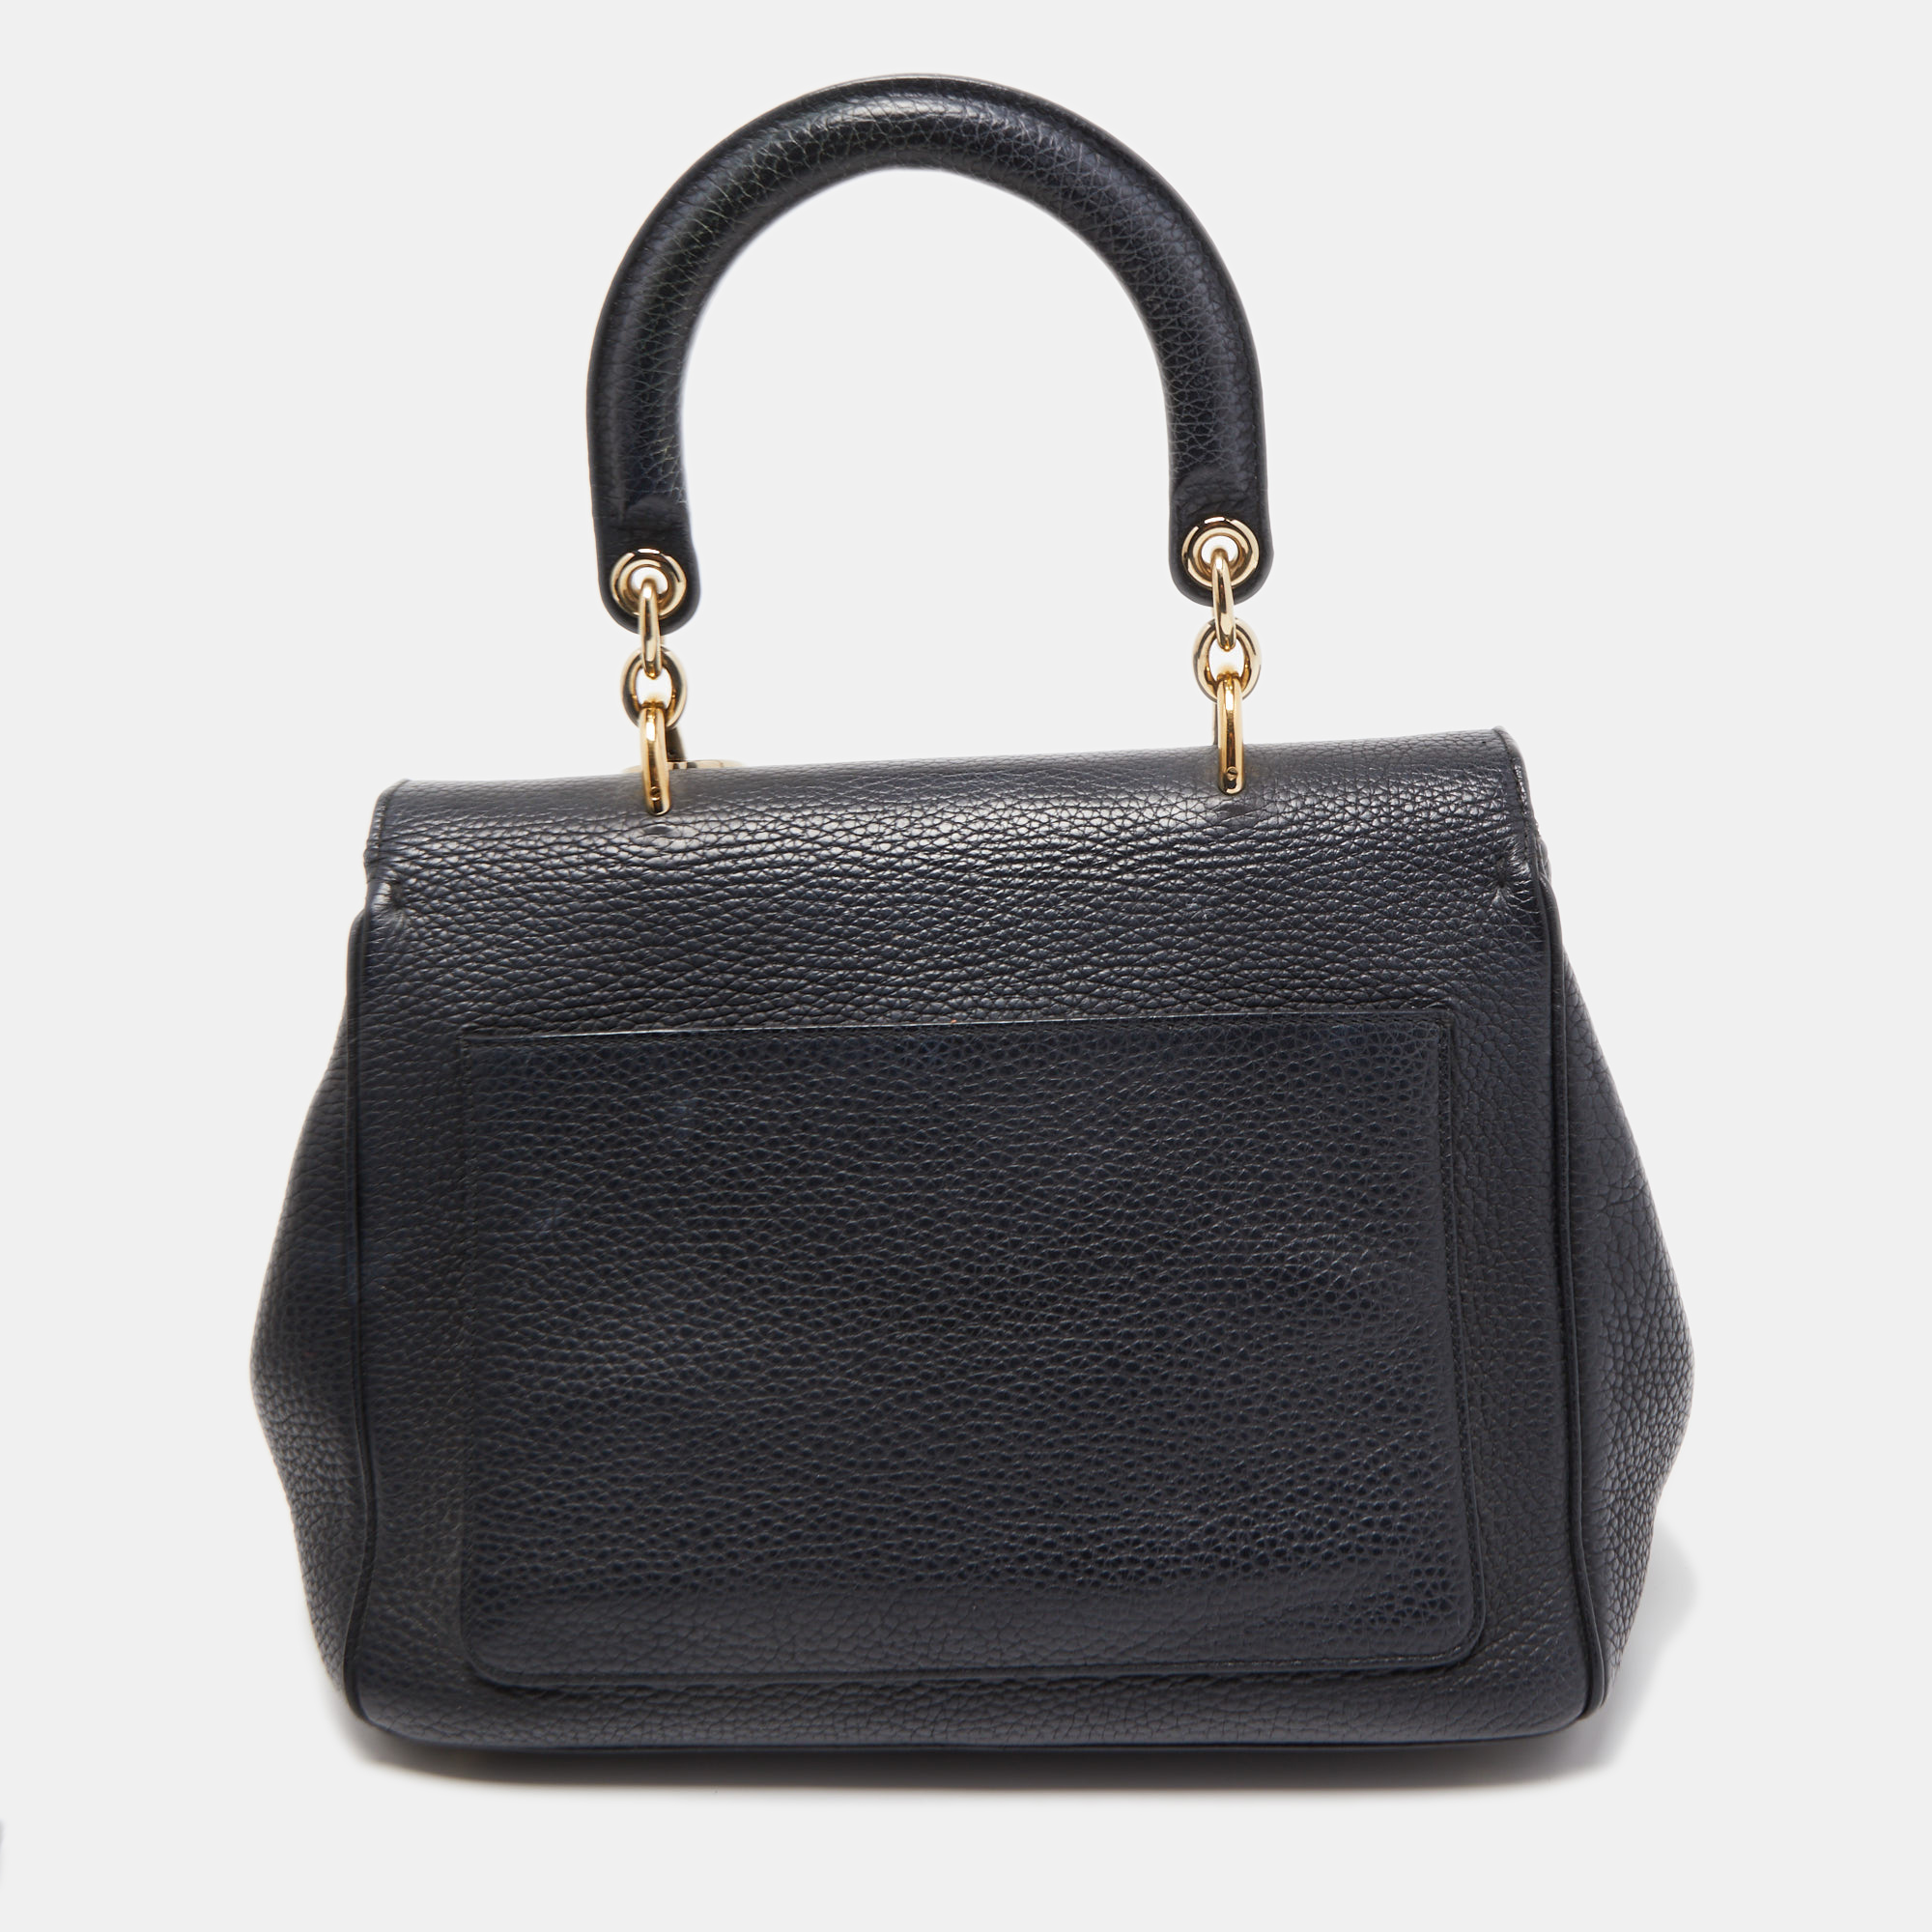 Dior Black Leather Small Be Dior Top Handle Bag